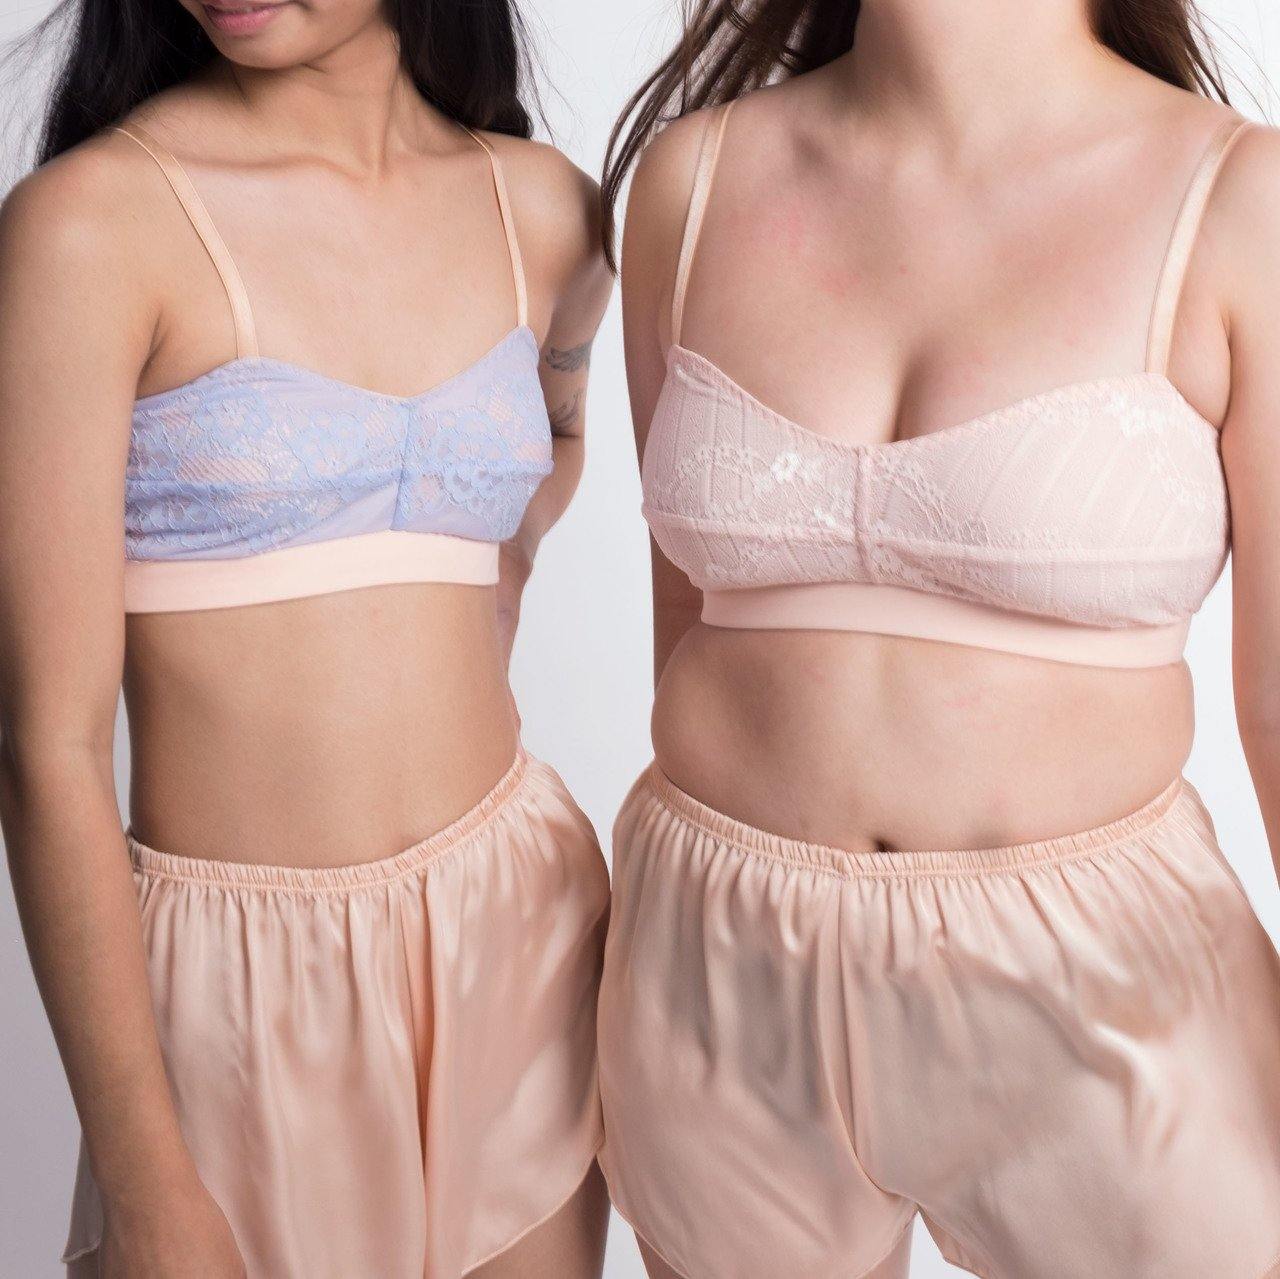 the baby bralette - Our Bralette Club